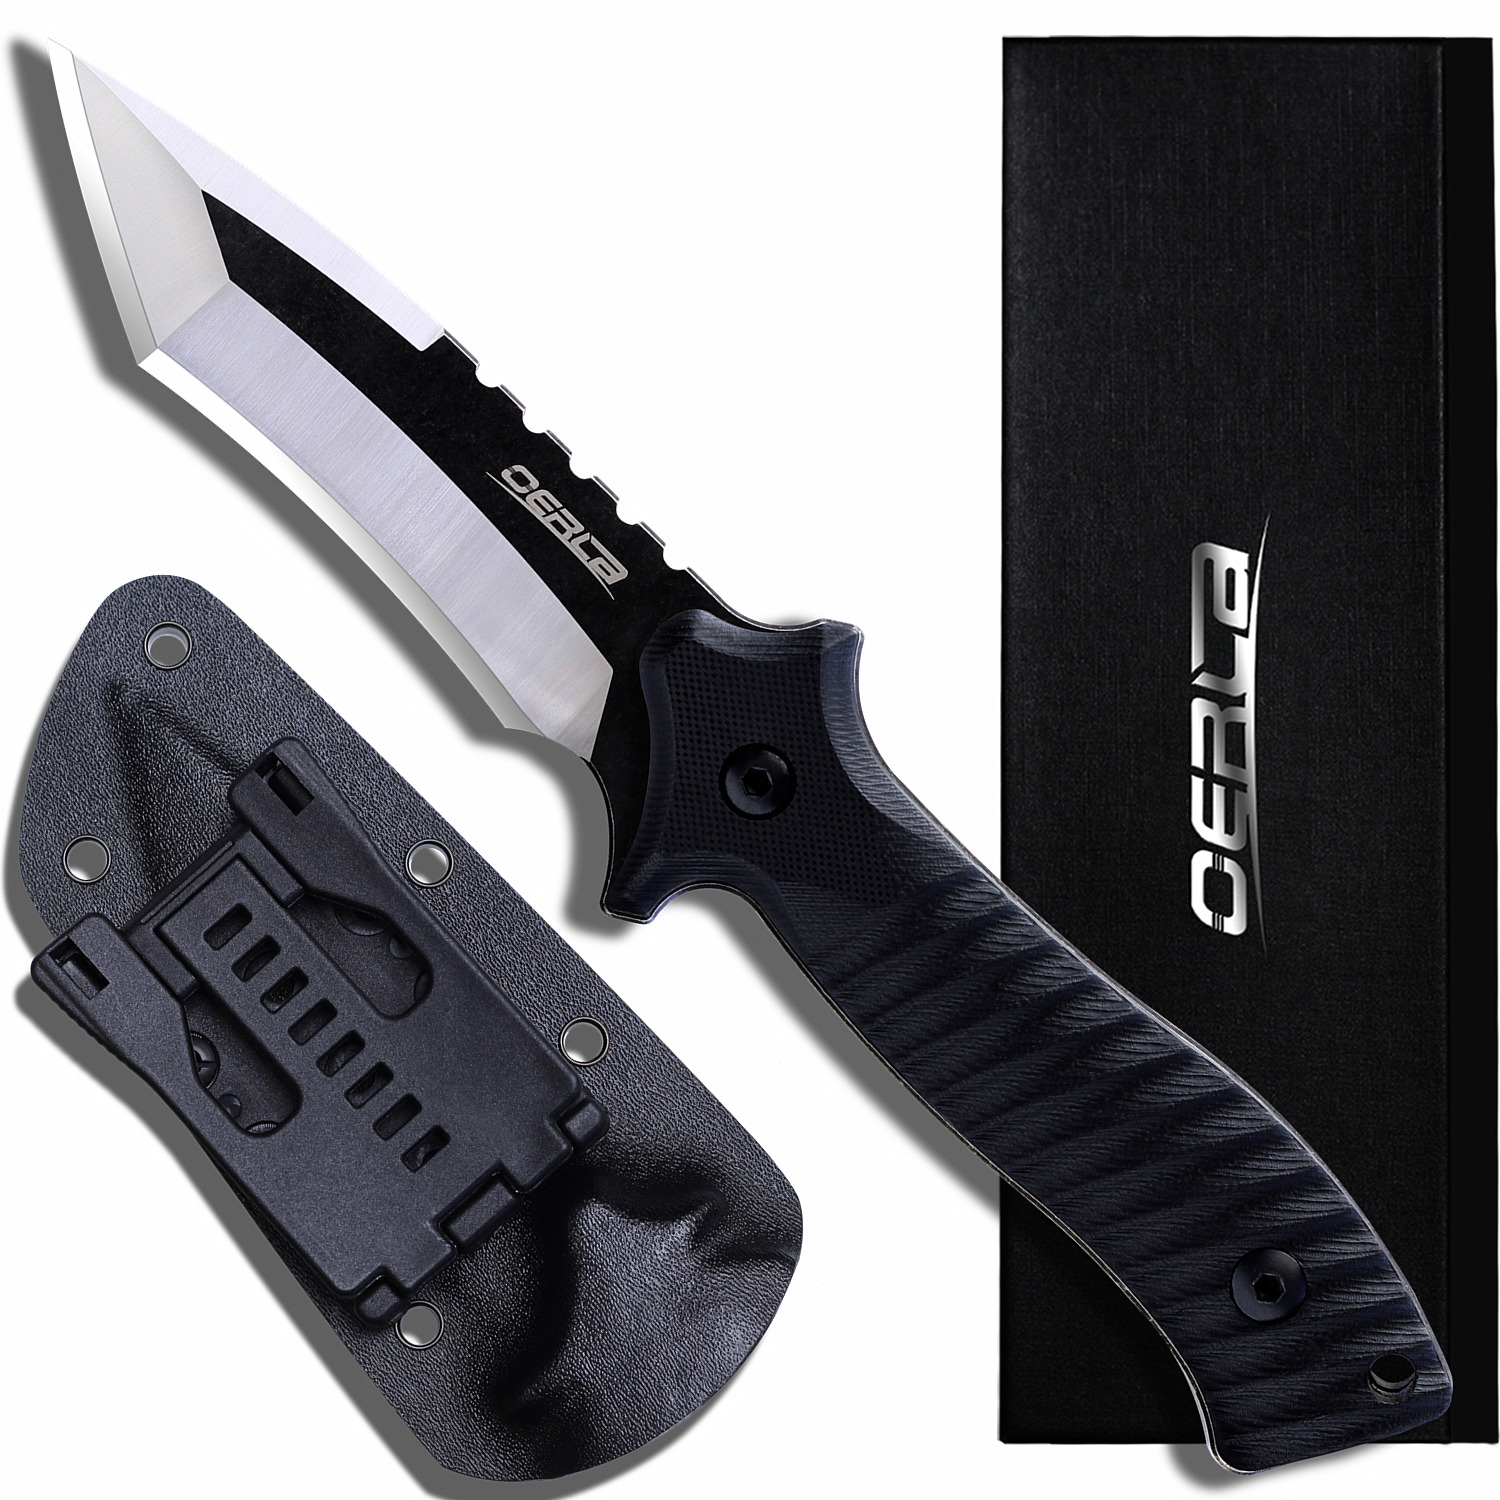 Oerla TAC OLK-038 Series Fixed Blade knife with G10 Handle and Kydex Sheath